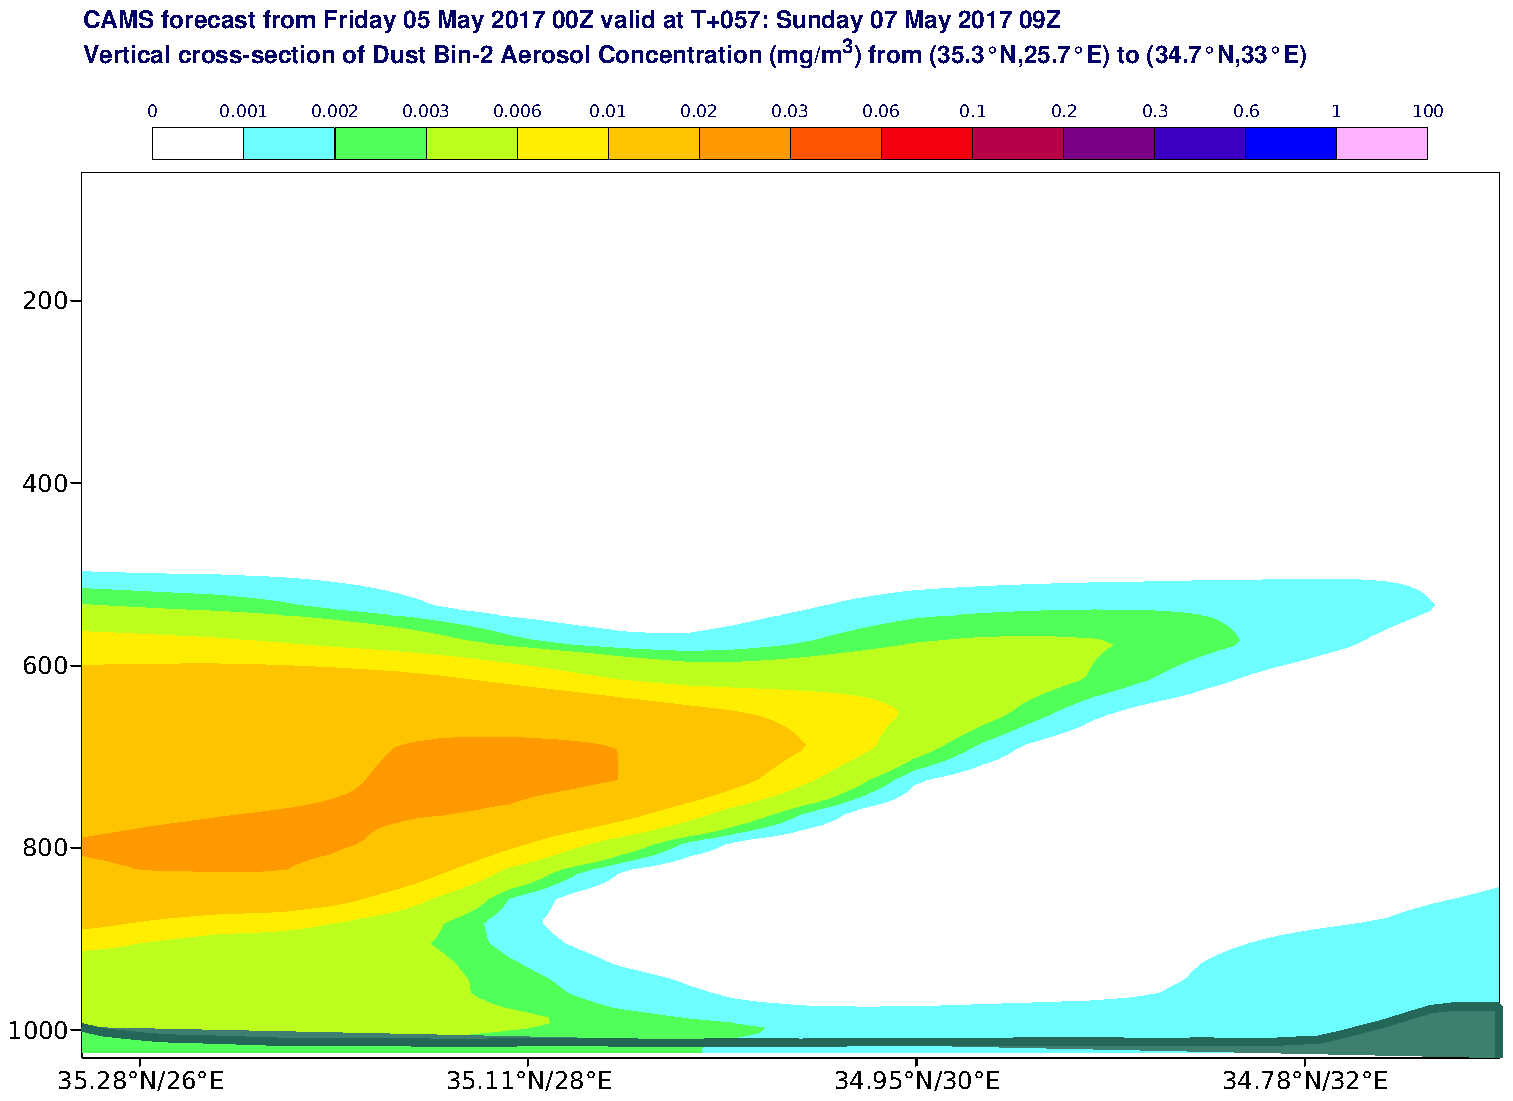 Vertical cross-section of Dust Bin-2 Aerosol Concentration (mg/m3) valid at T57 - 2017-05-07 09:00